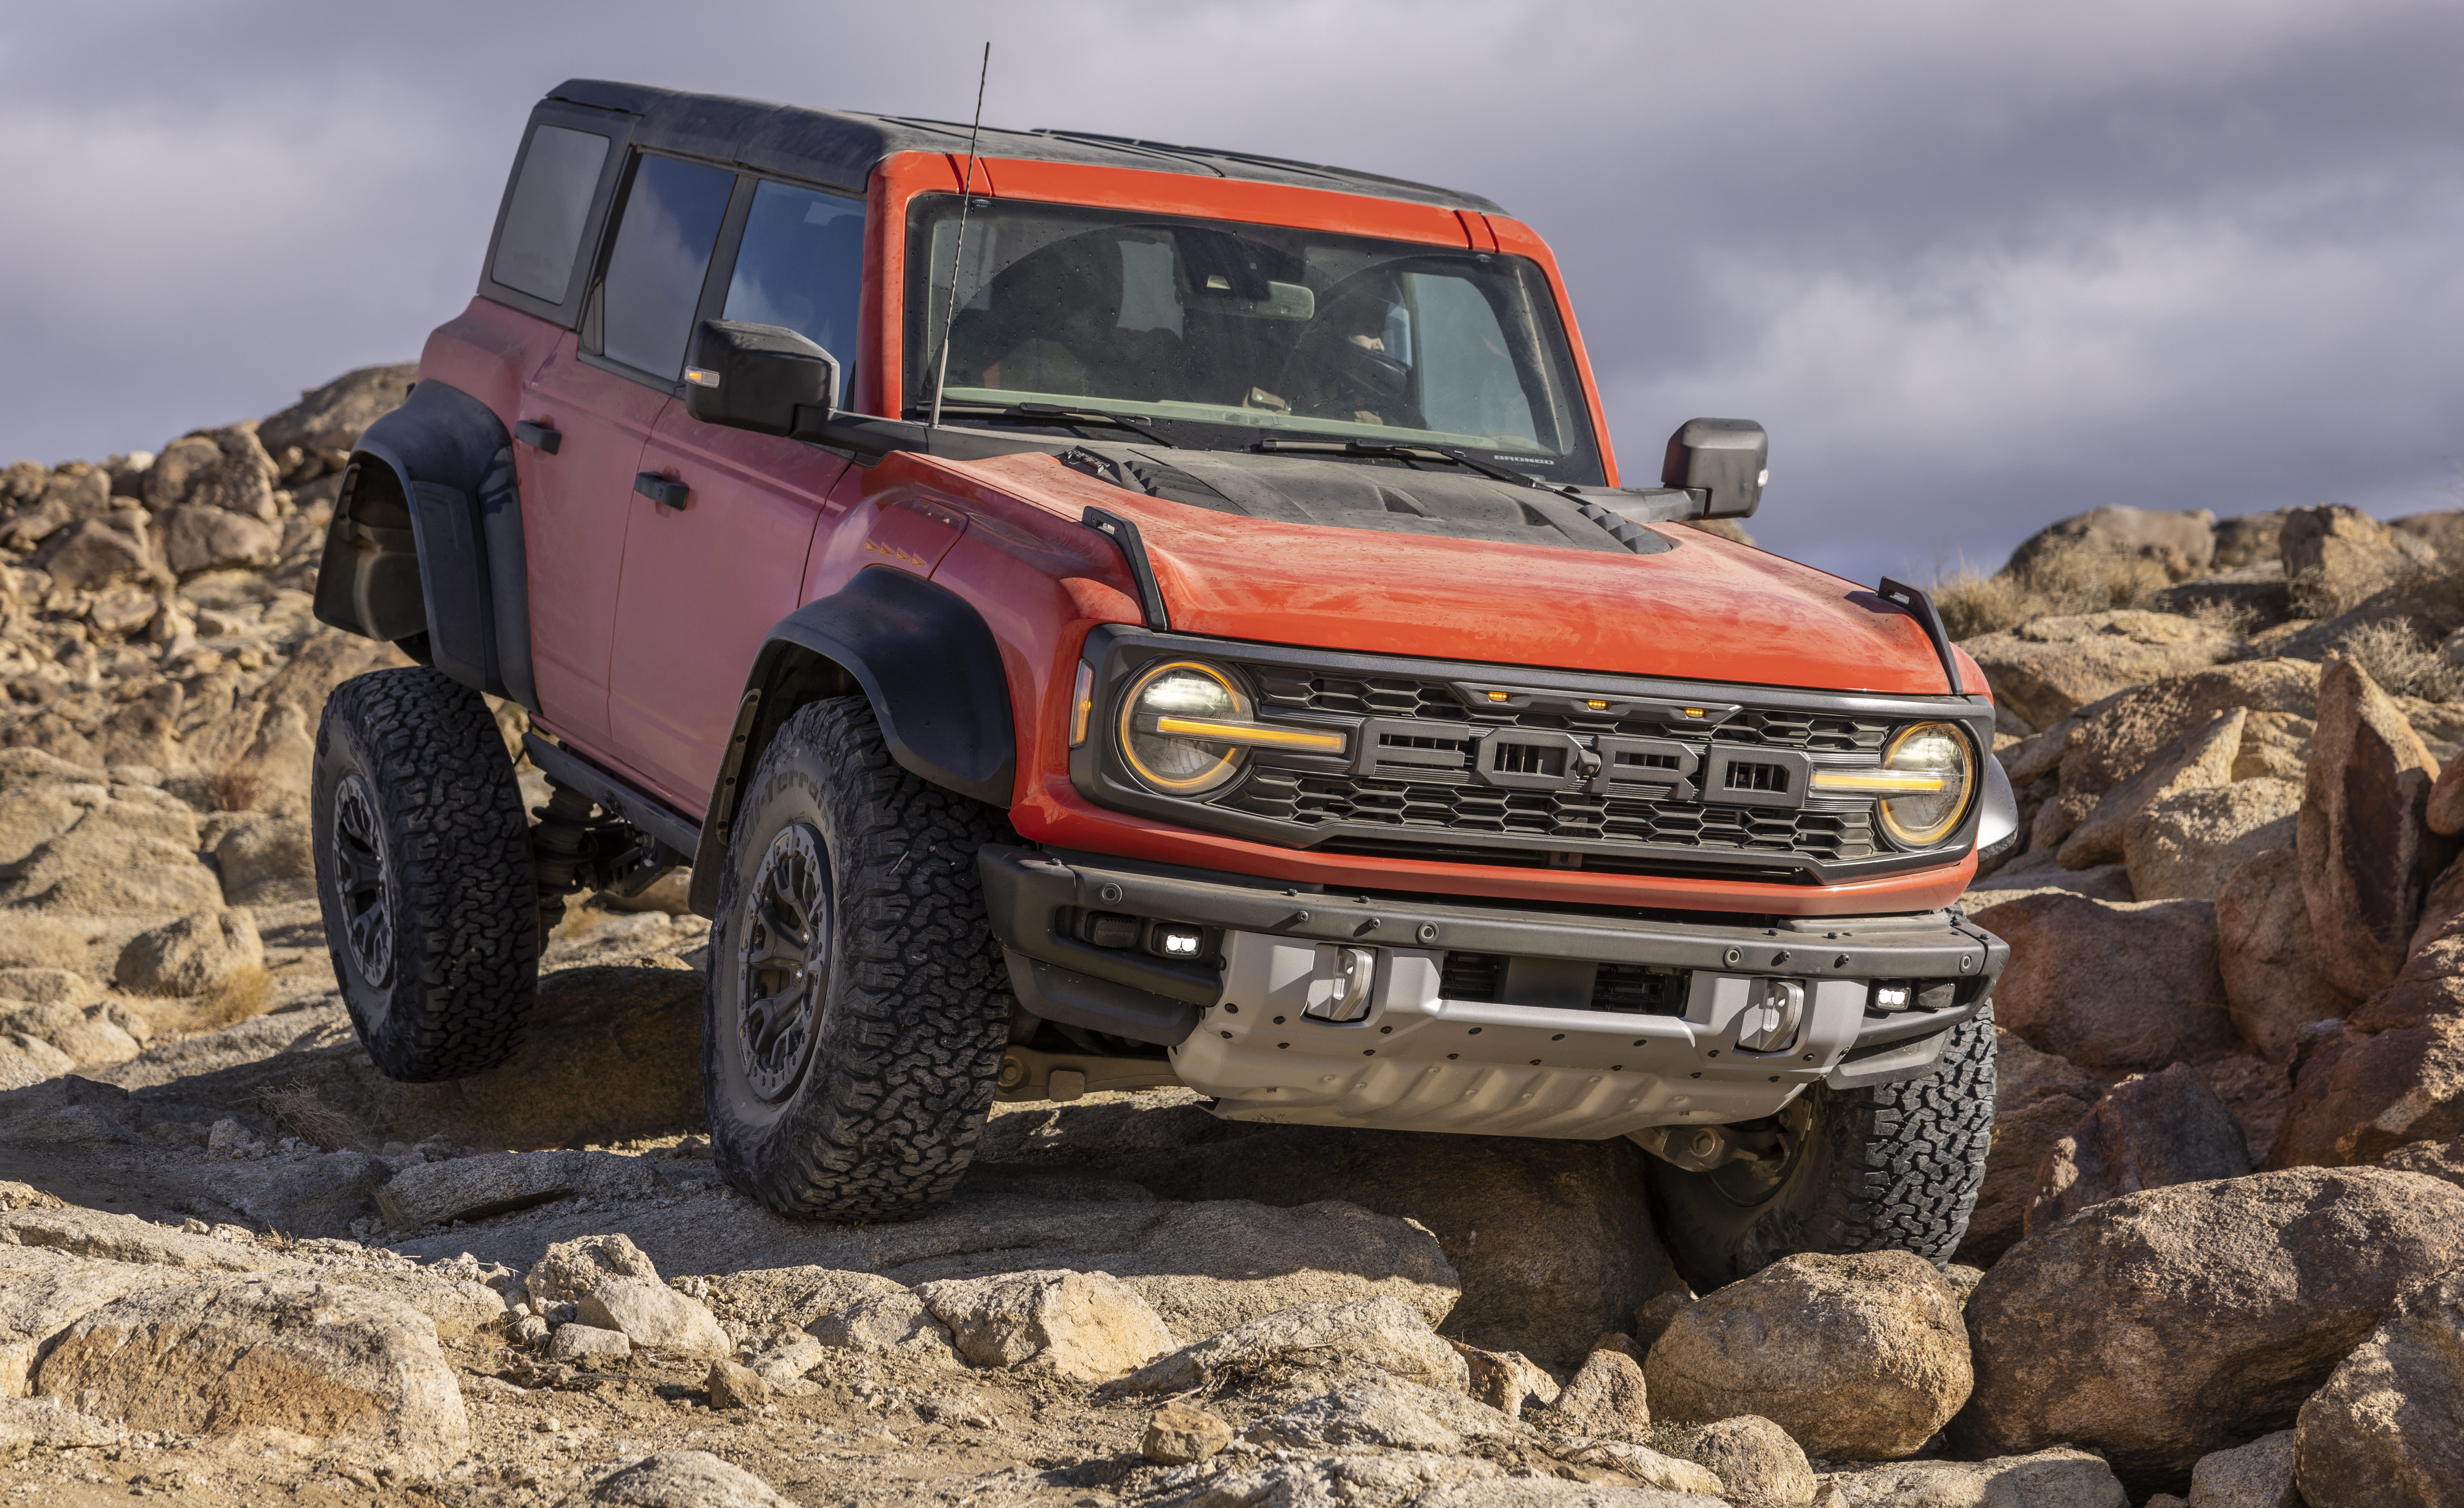 Ford Reveals New Bronco Raptor Performance SUV as a ‘Desert-Racing Beast,’ Says CEO – NBC New York